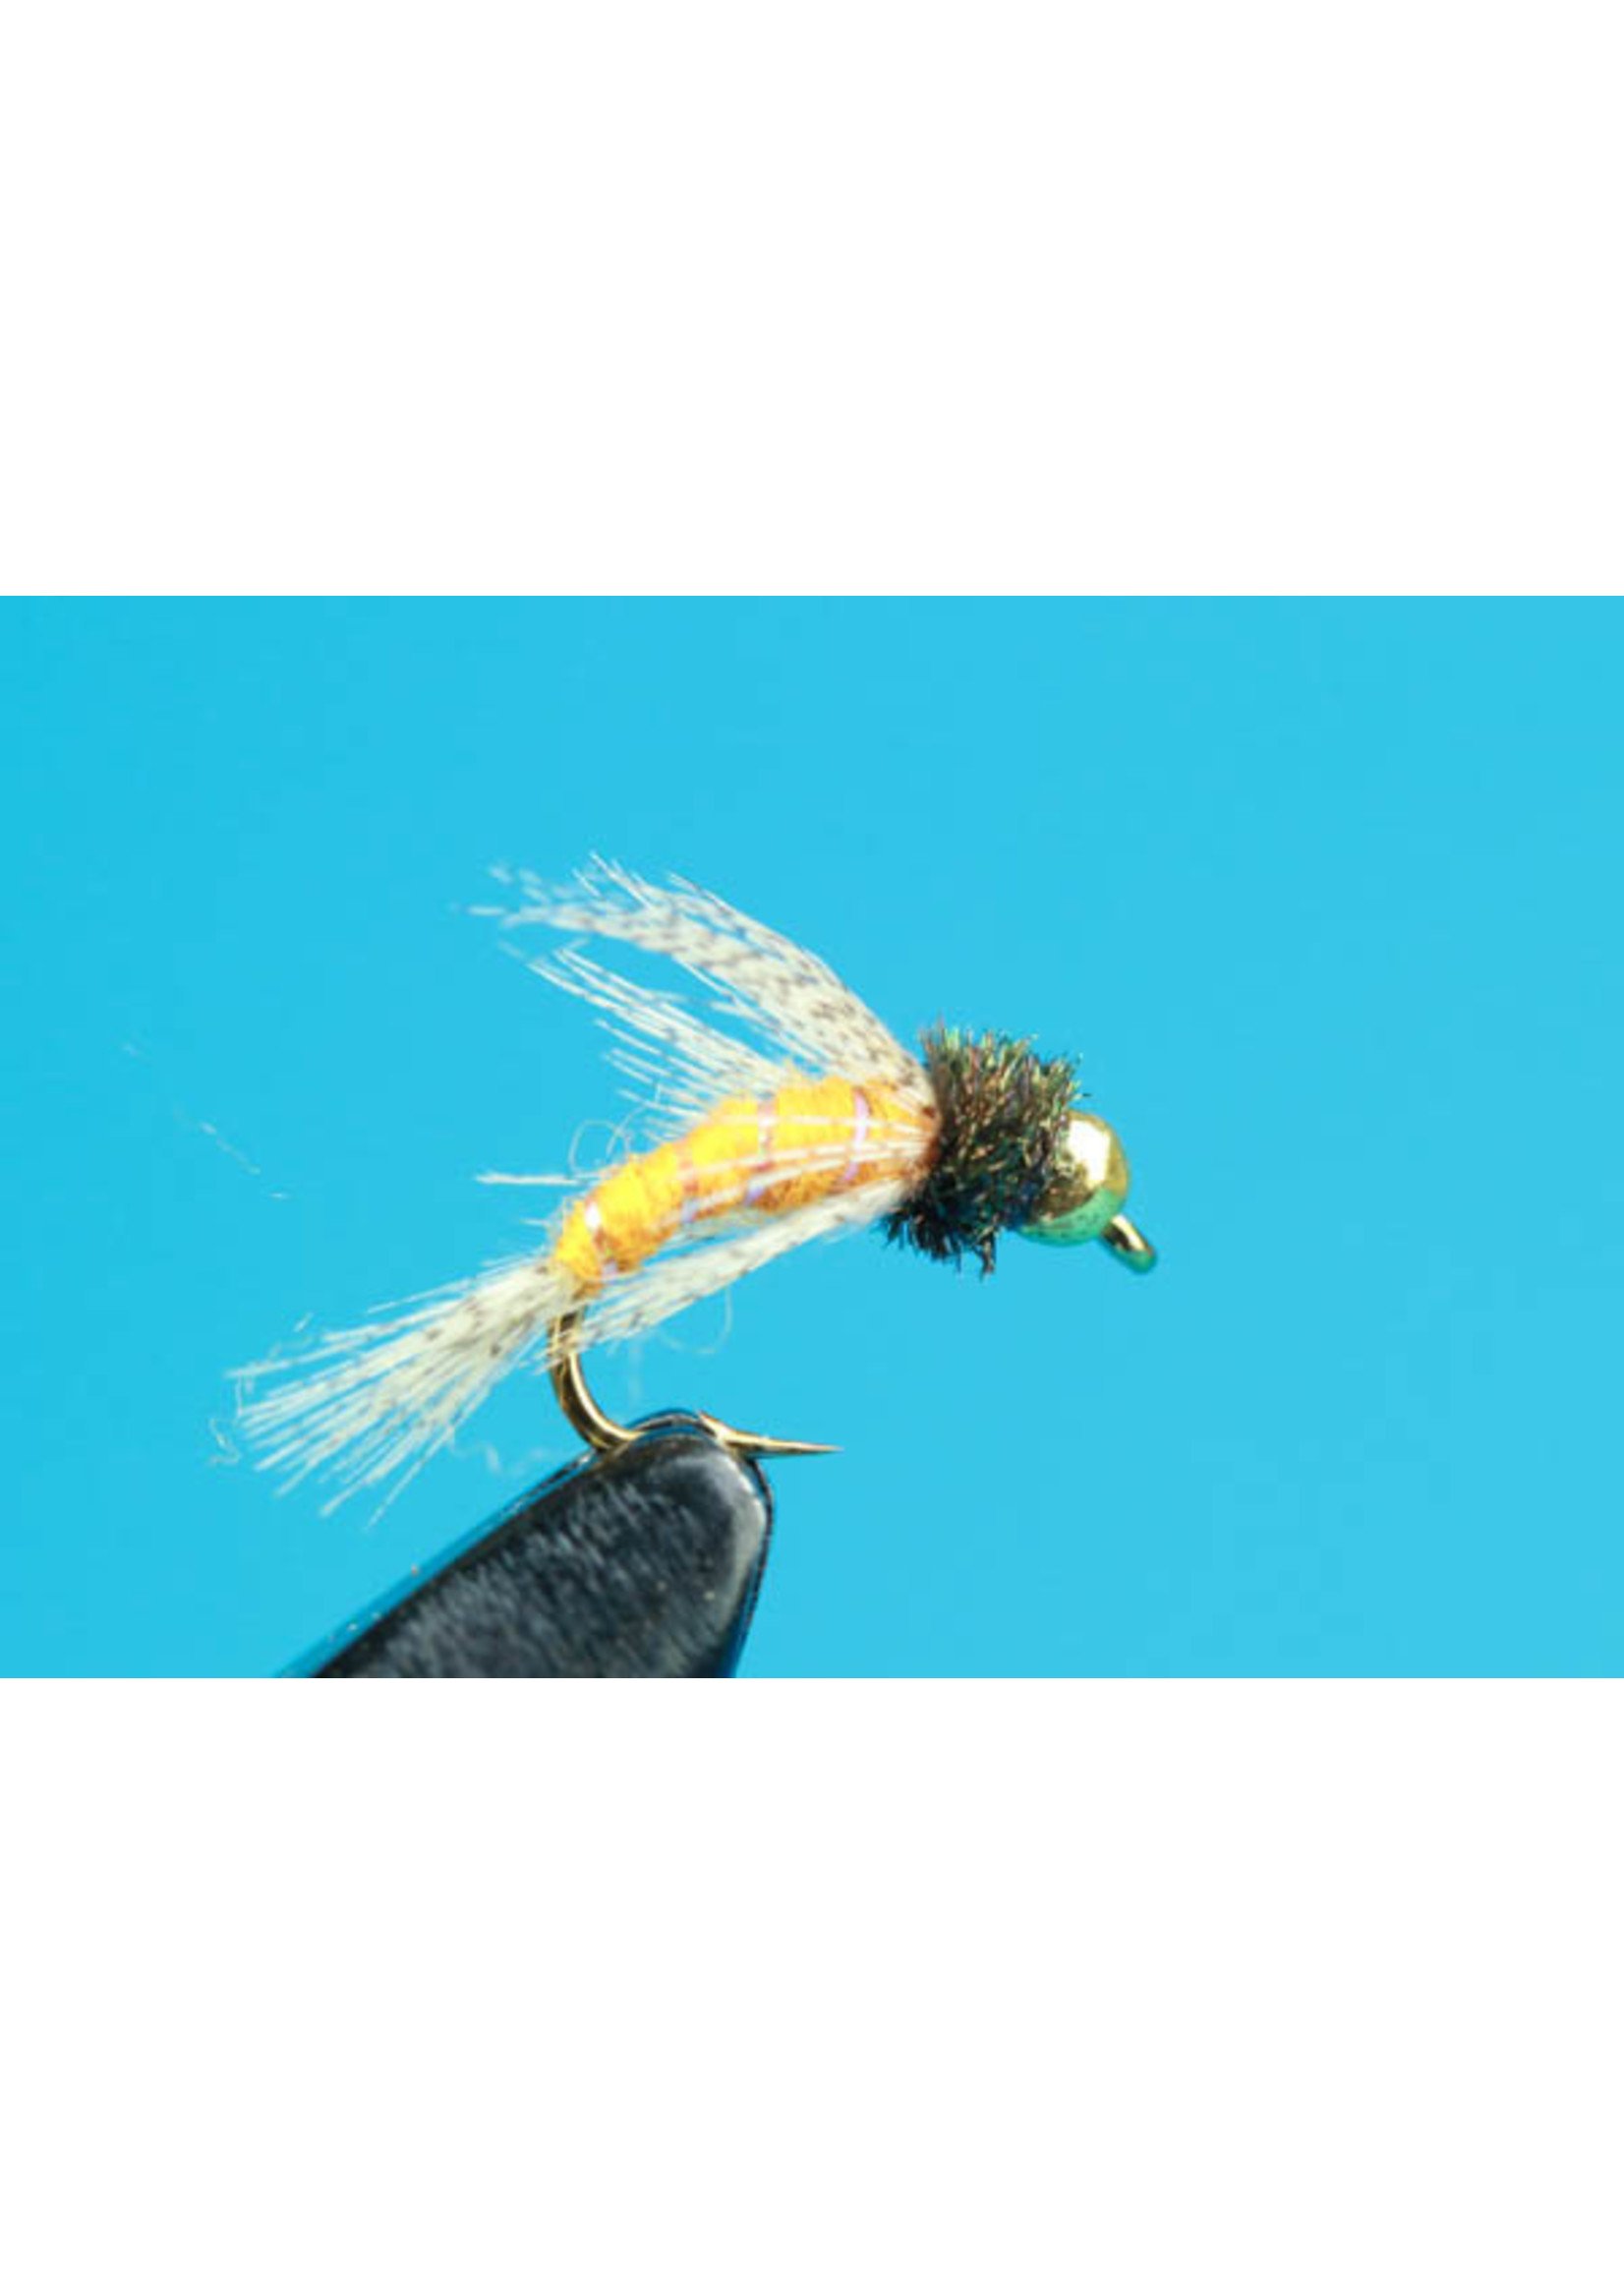 Griffith Gnats Emerger